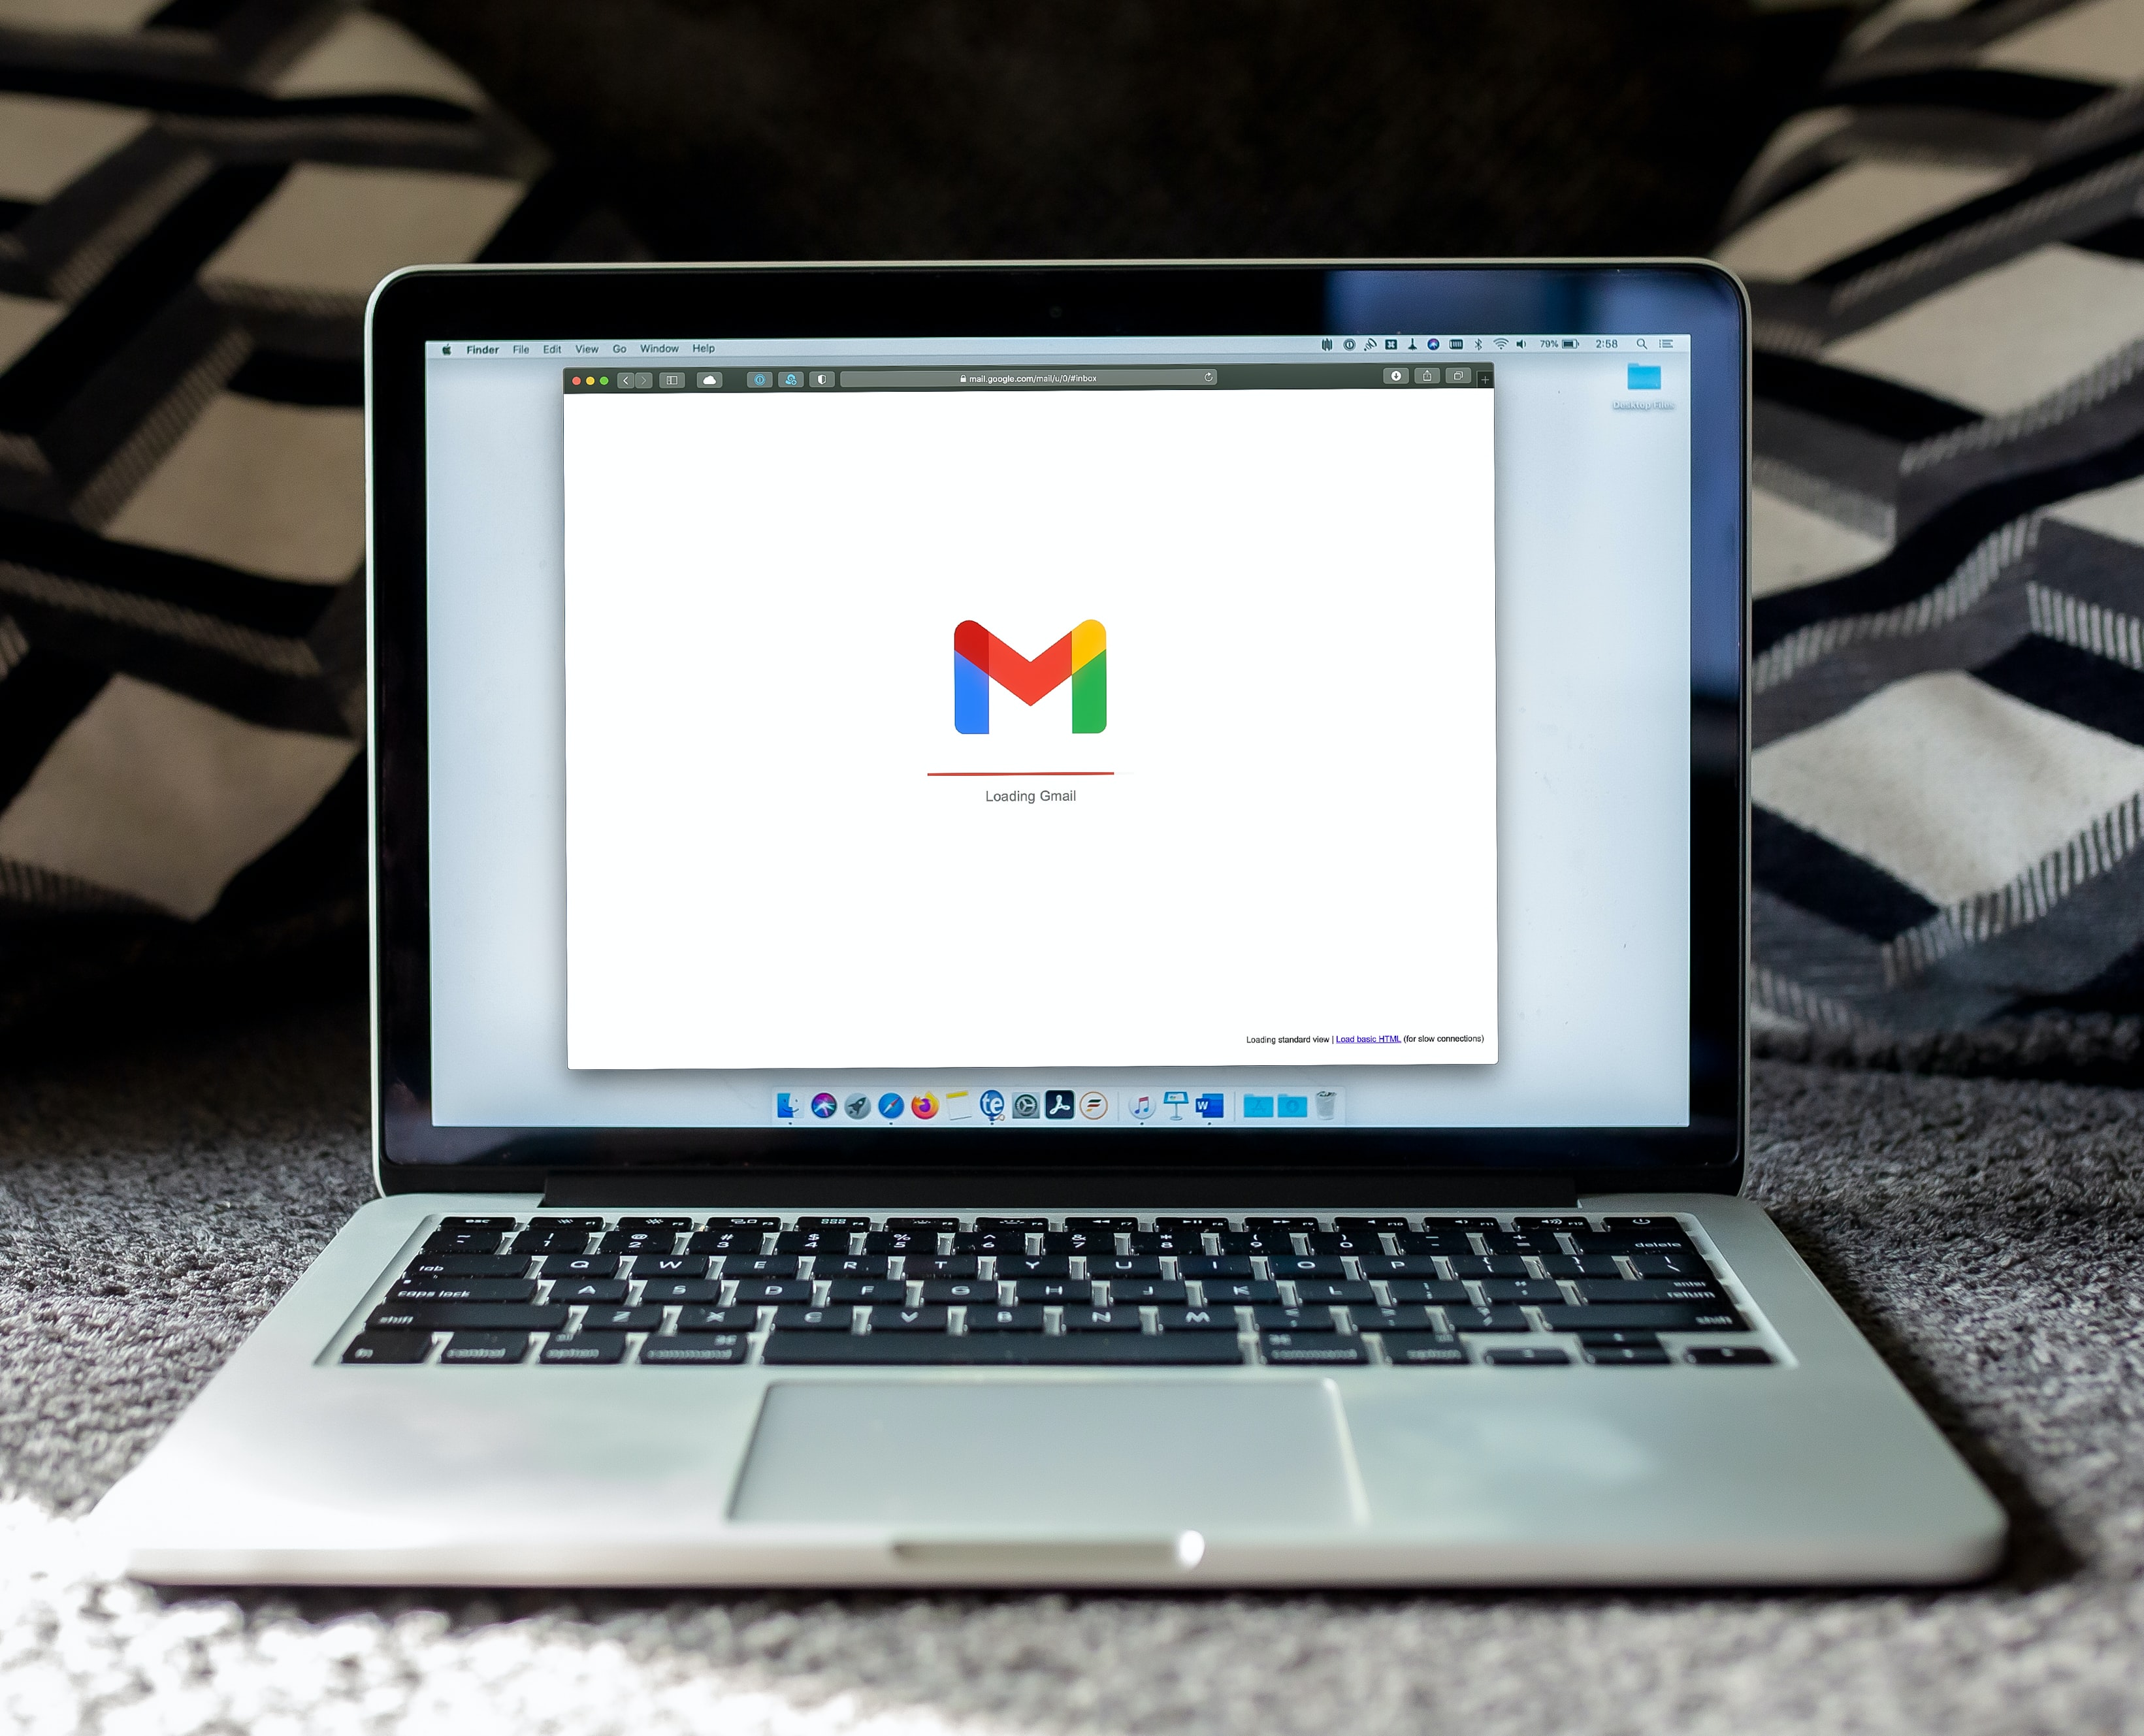 Photo by Solen Feyissa on Unsplash. It's an image of a Macbook with Gmail open. The computer is placed on a cute carpet, giving a cozy feeling. Because carpets are cozy? Also, there's blankets in the background